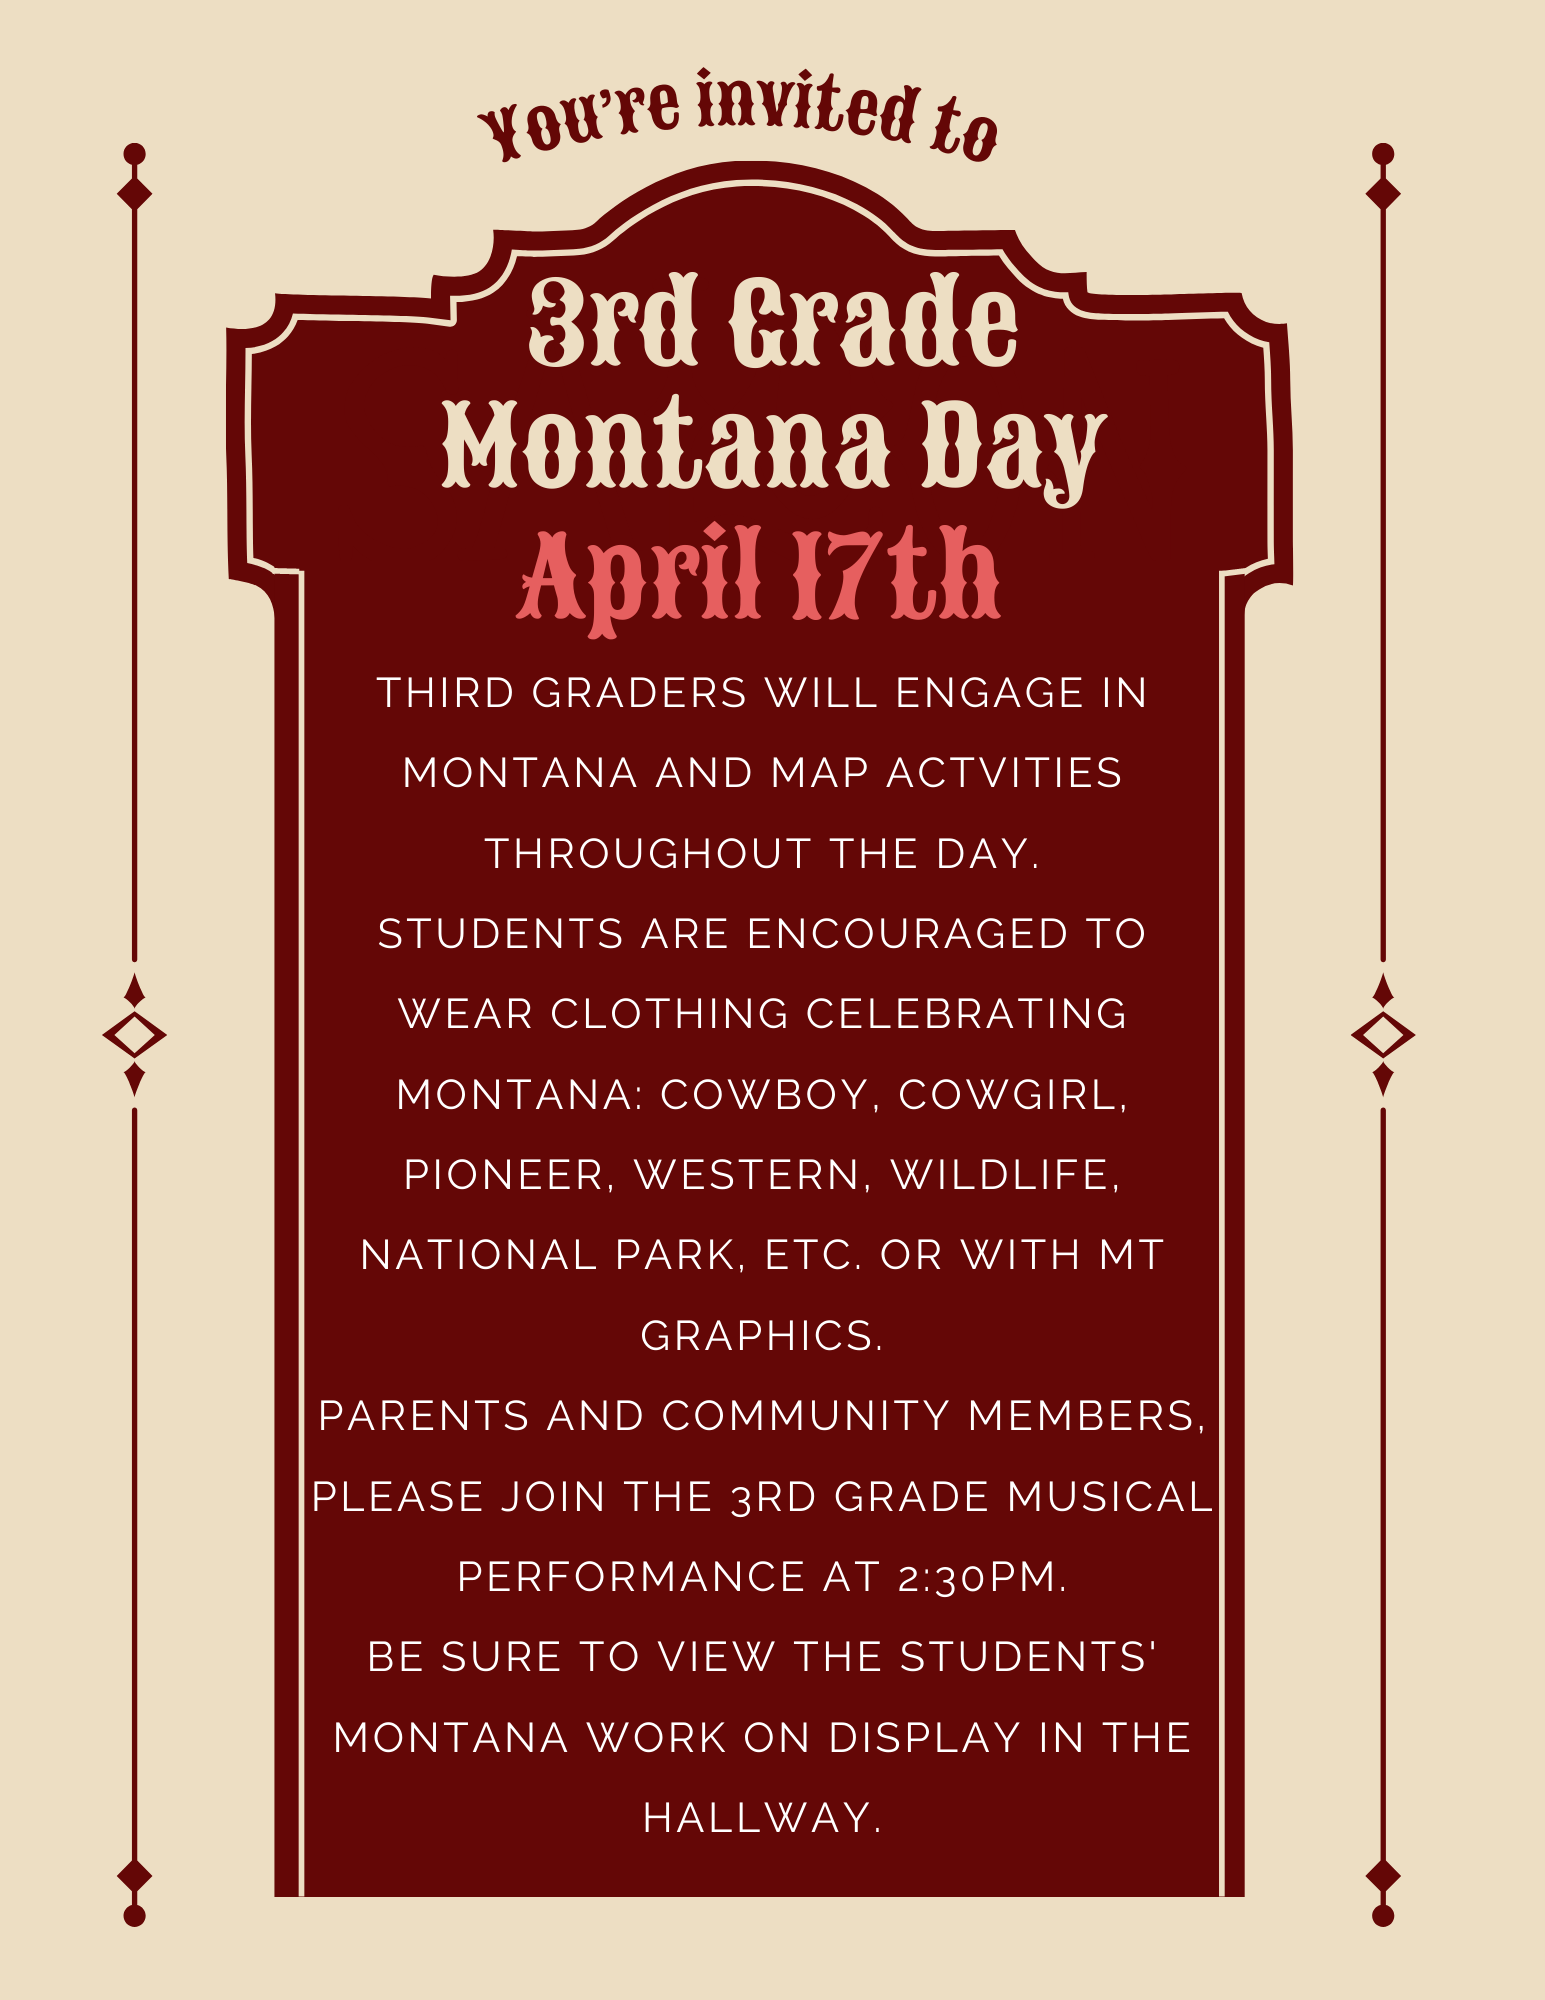 Flyer stating: Third graders will engage in Montana and map actvities throughout the day. Students are encouraged to wear clothing celebrating Montana: cowboy, cowgirl, pioneer, western, wildlife, National Park, etc. or with MT graphics. Parents and community members, please join the 3rd grade musical performance at 2:30pm. Be sure to view the students' Montana work on display in the hallway.